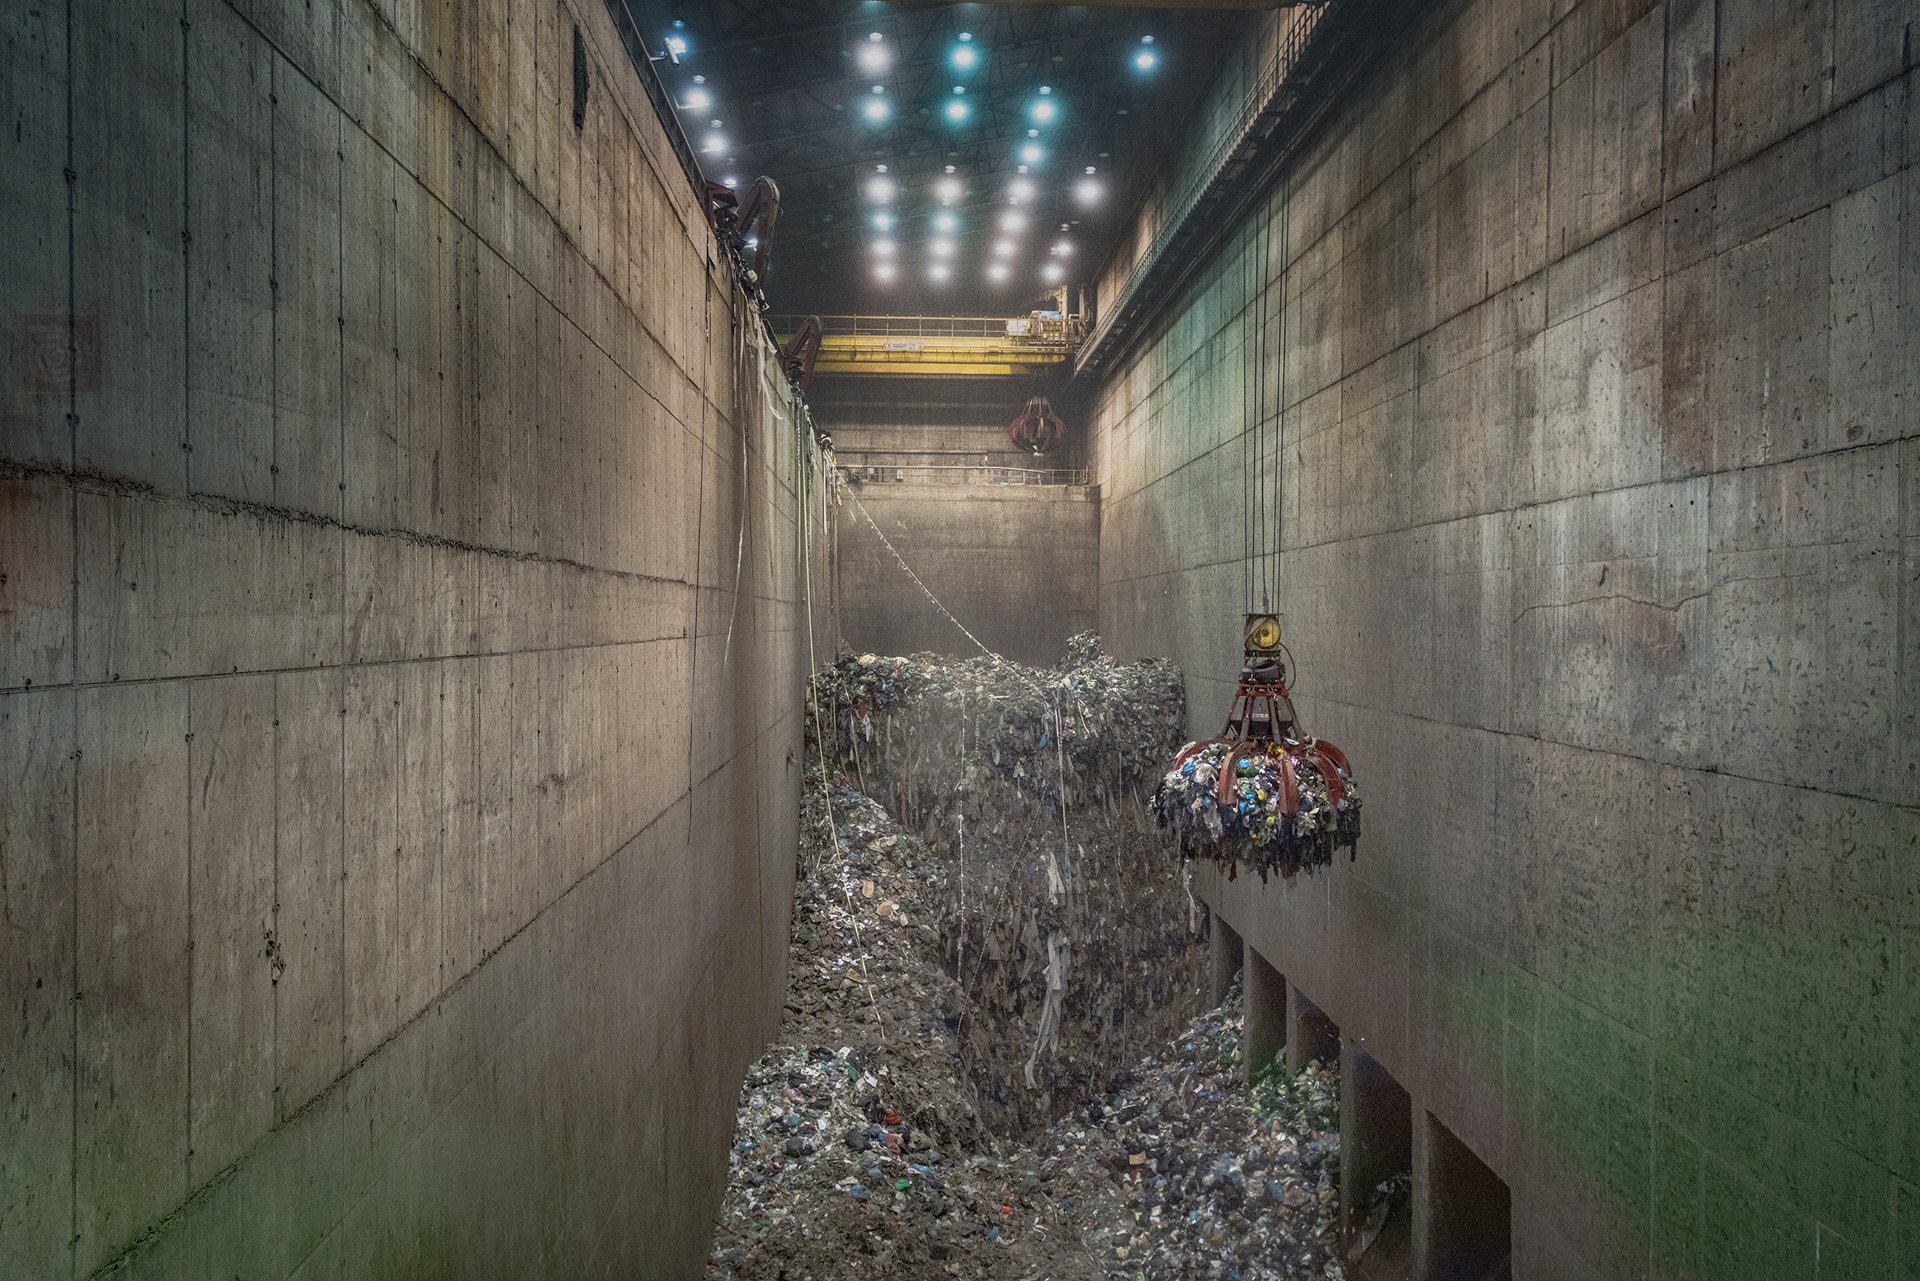 <p>The collection chamber of a waste-to-energy plant, in Turin, Italy. The plant powers the largest district-heating network in Italy, serving around 9,300 homes and more than 500,000 citizens.</p>
